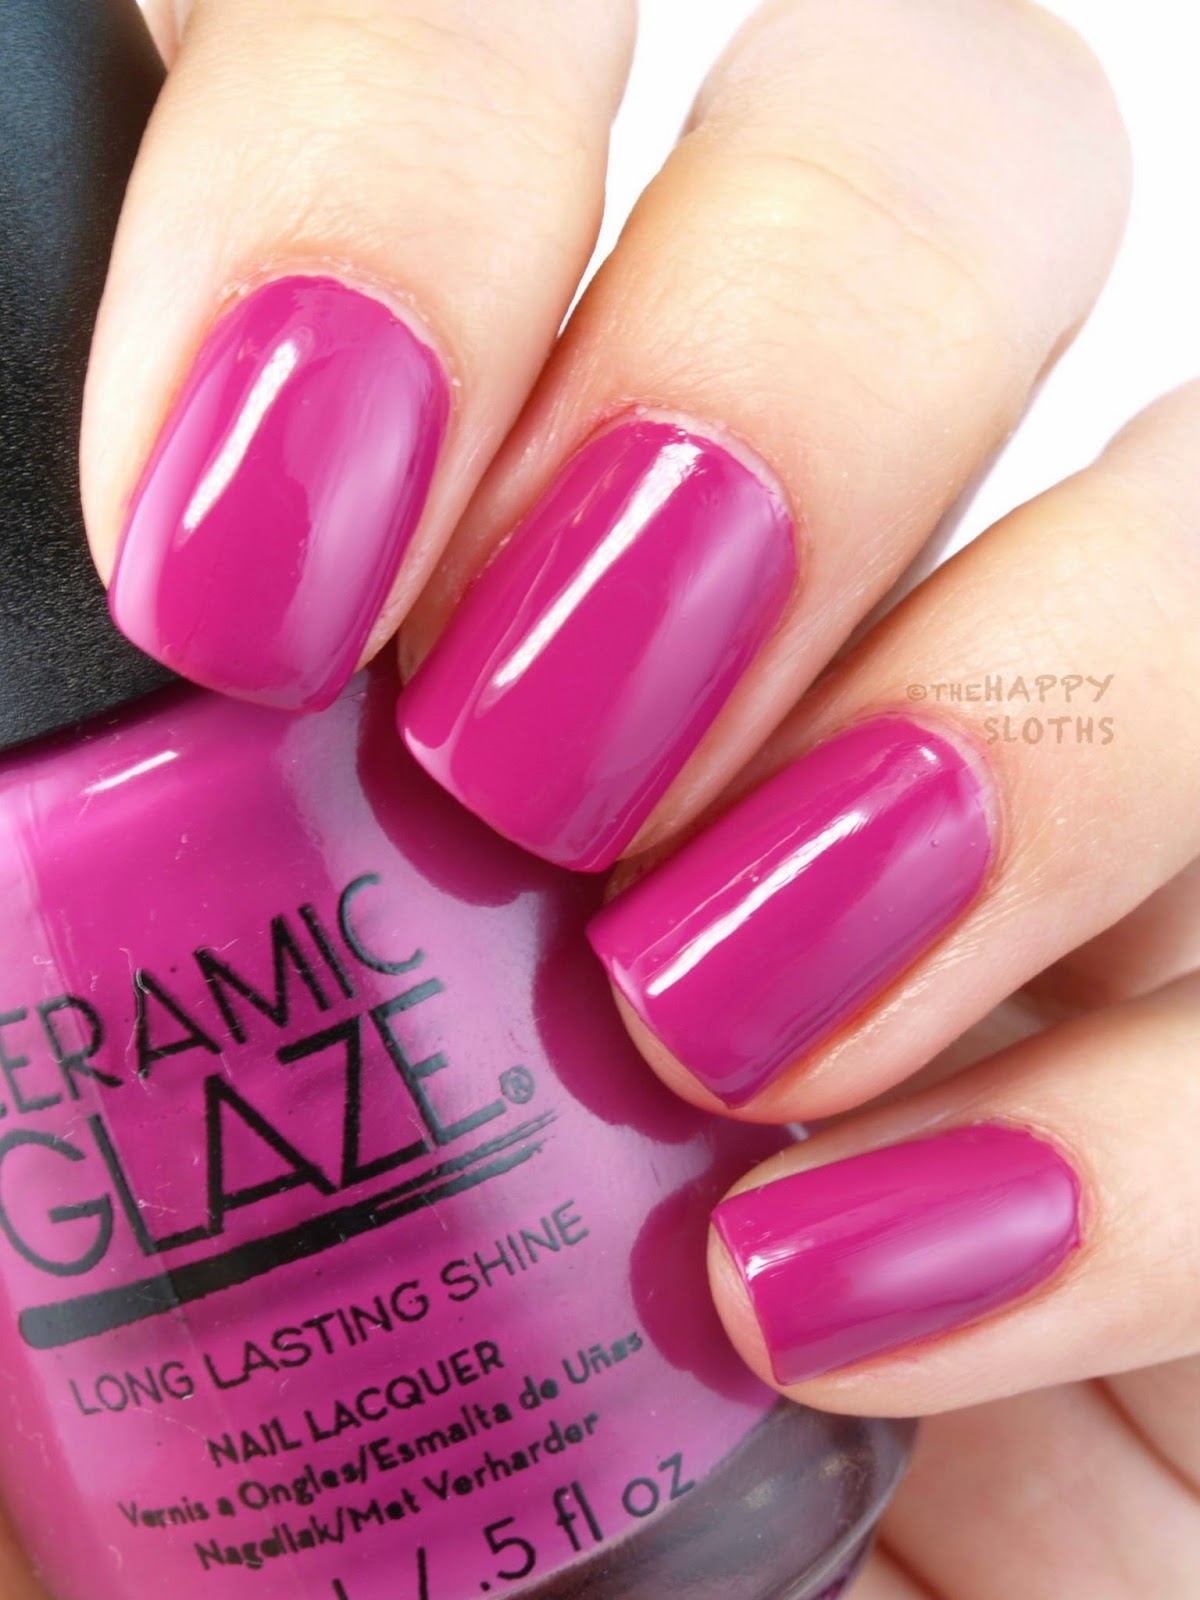 Ceramic Glaze Spring 2015 Stunning Soiree Collection: Review and Swatches